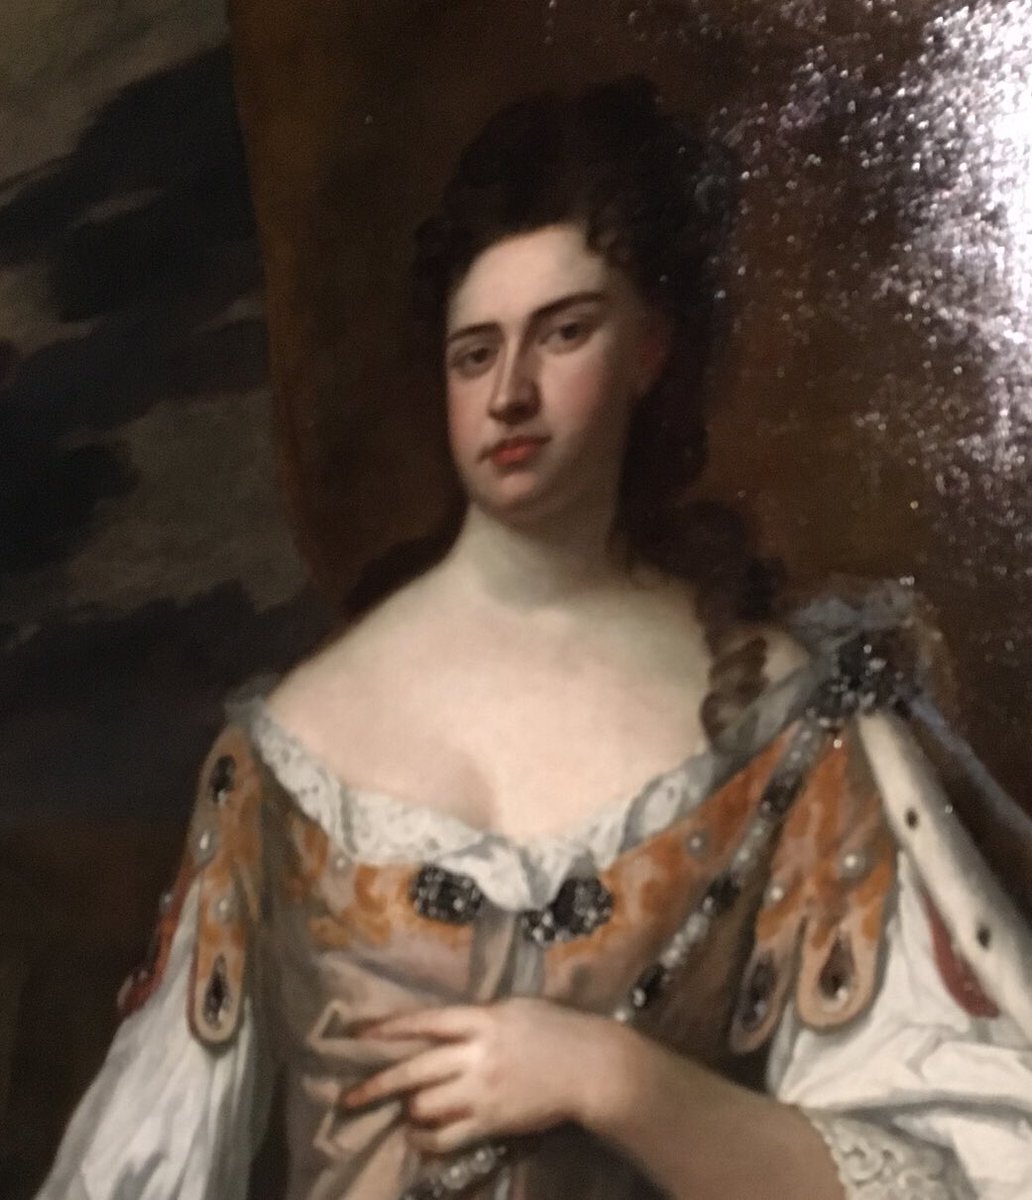 Died on 8th March 1702, William III, to be succeeded by his sister in law Anne who would oversee the unification of England and Scotland, becoming the first monarch of the United Kingdom.